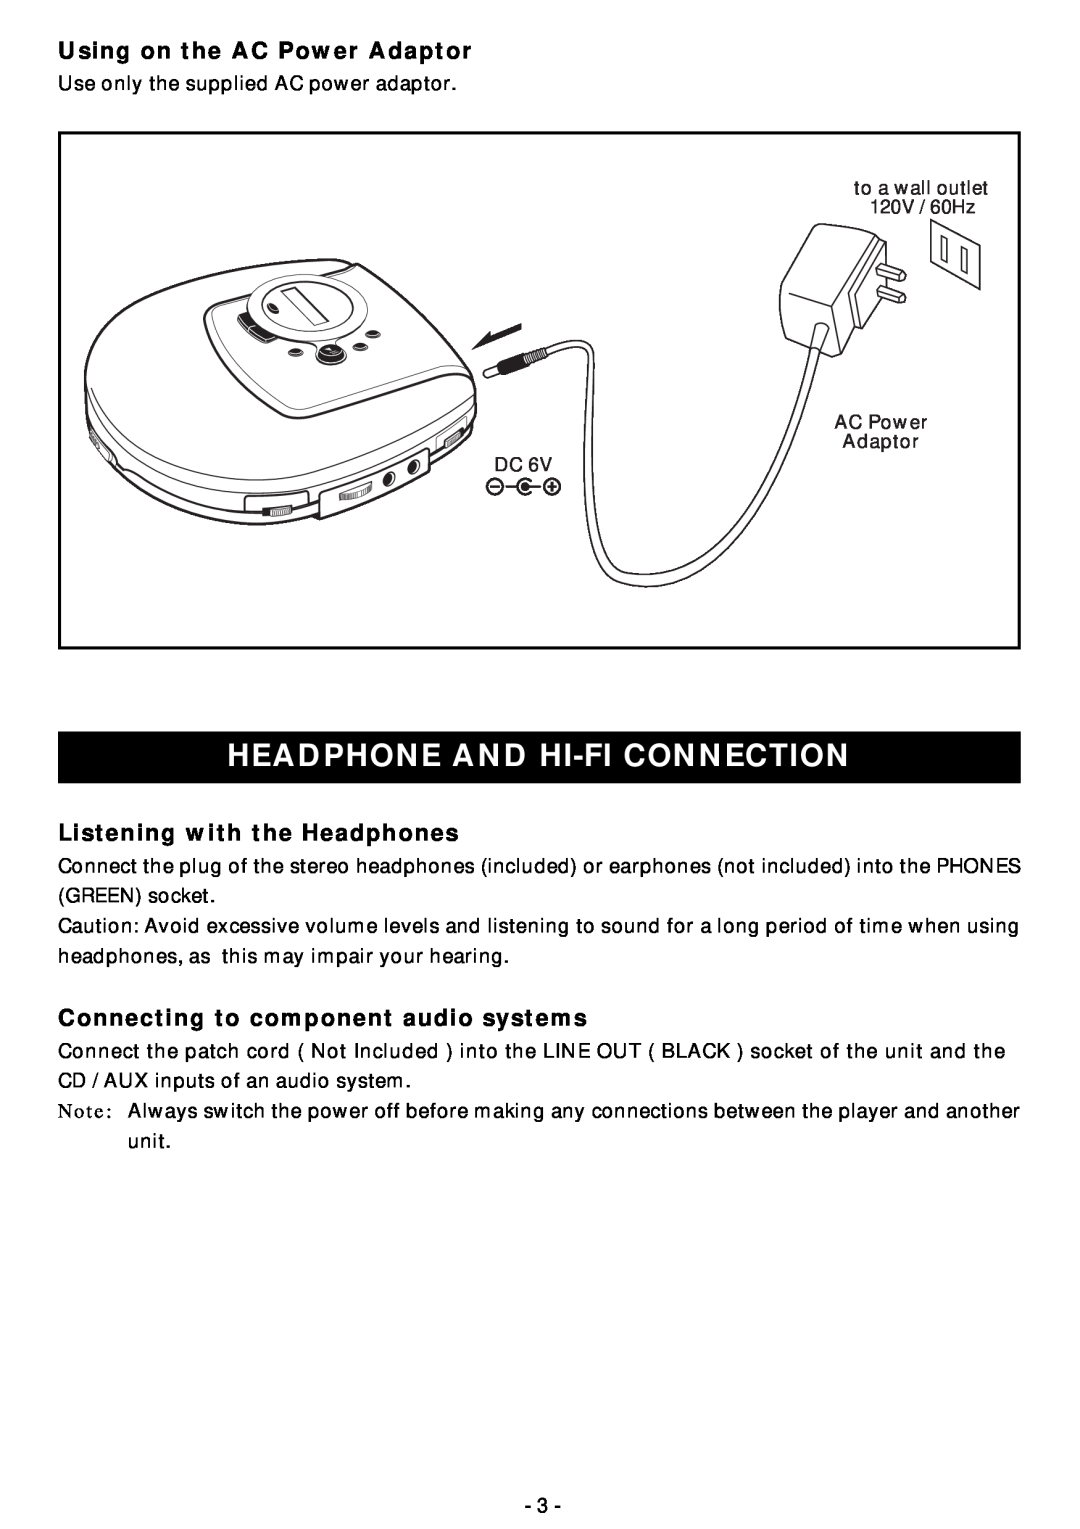 Memorex MD6440cp manual Headphone And Hi-Ficonnection, Using on the AC Power Adaptor, Listening with the Headphones 